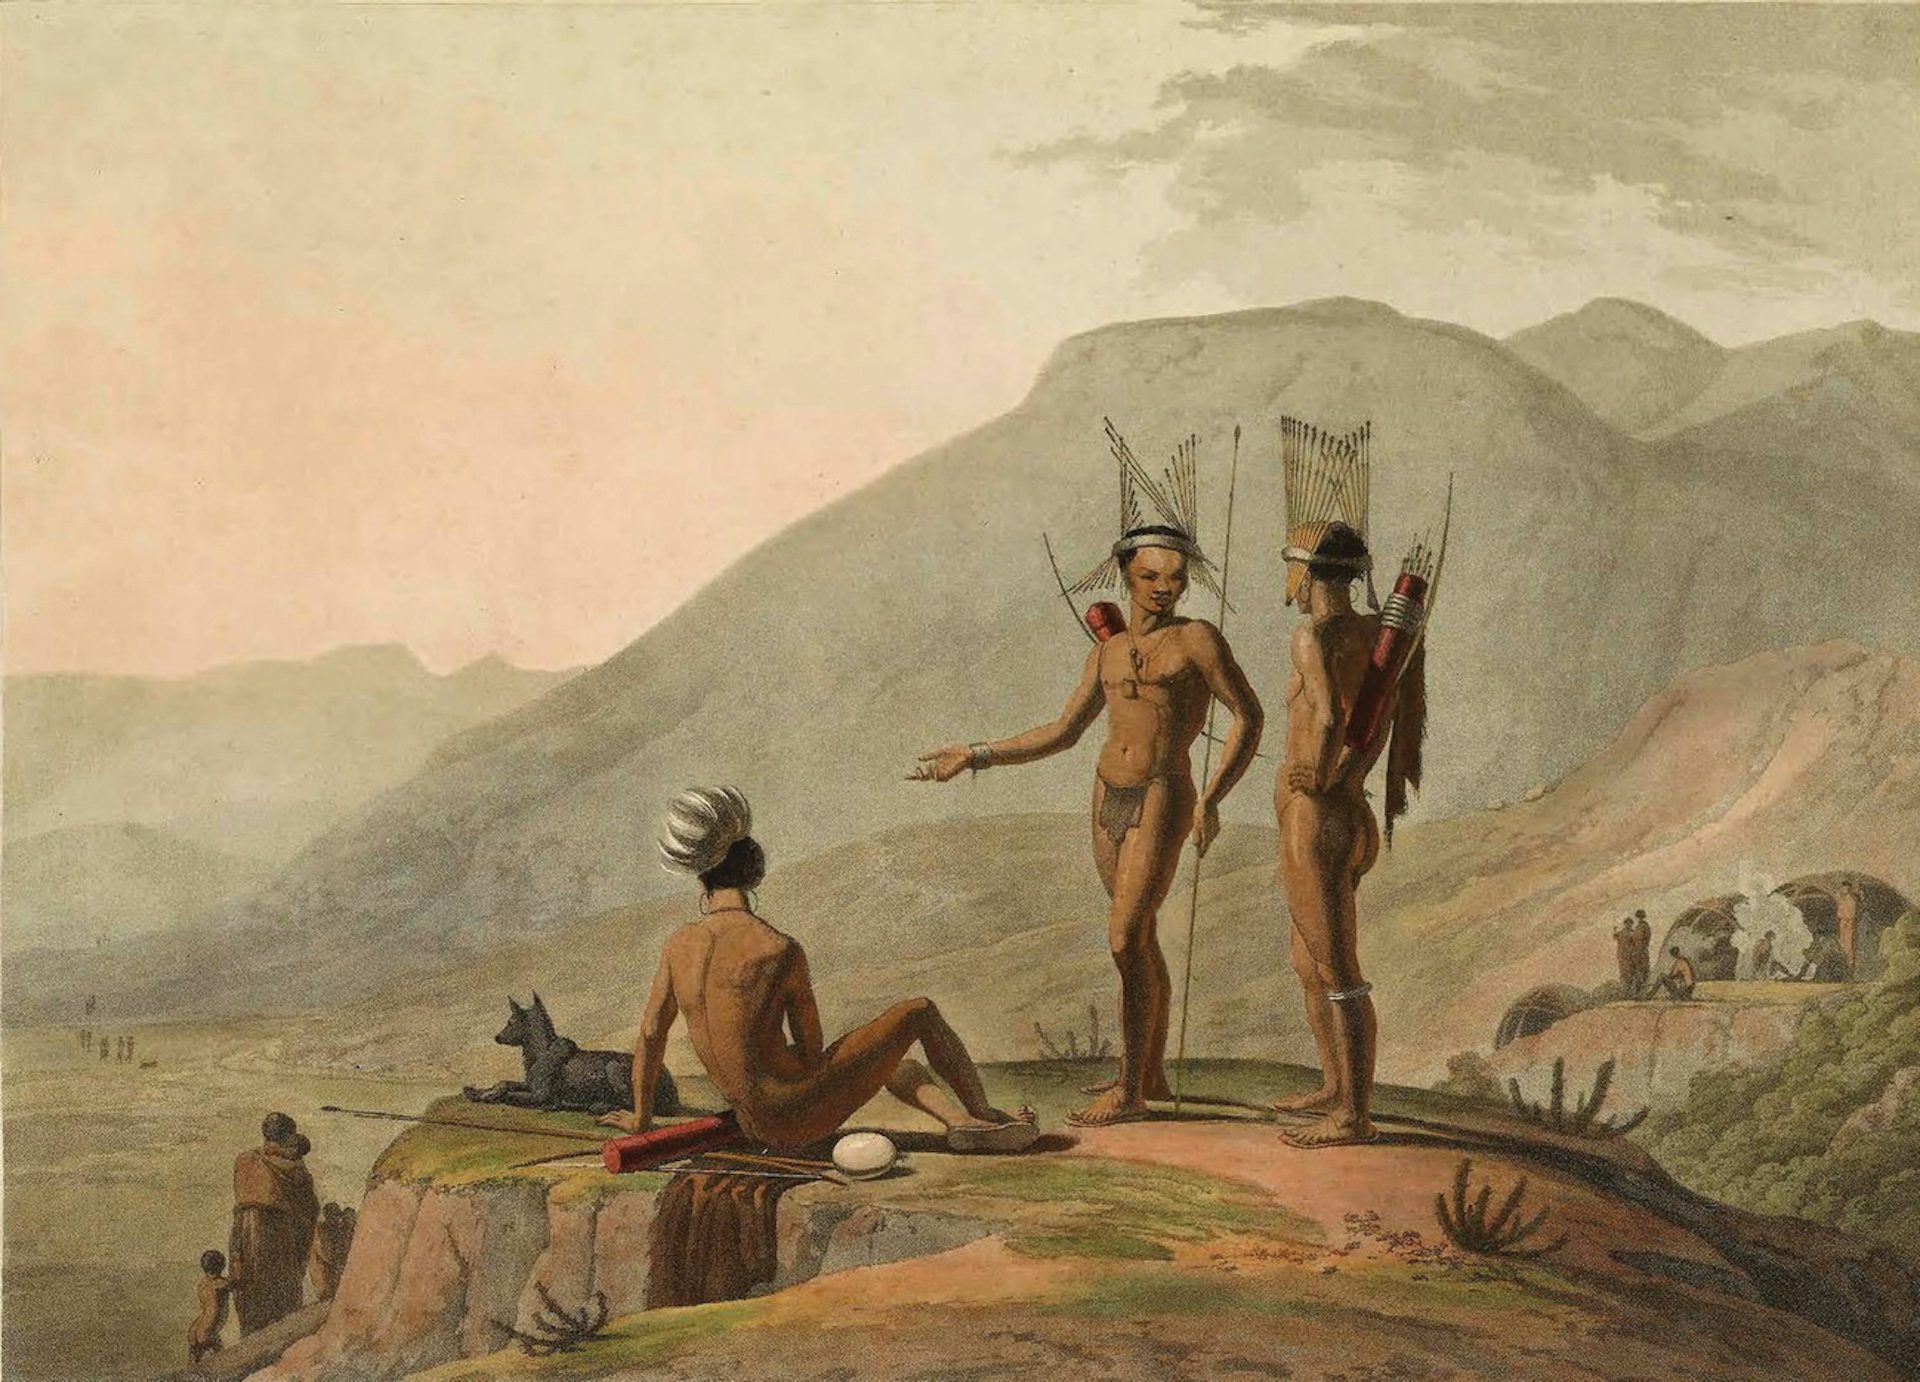 Bushmen armed for an expedition by Samuell Daniel (1804).